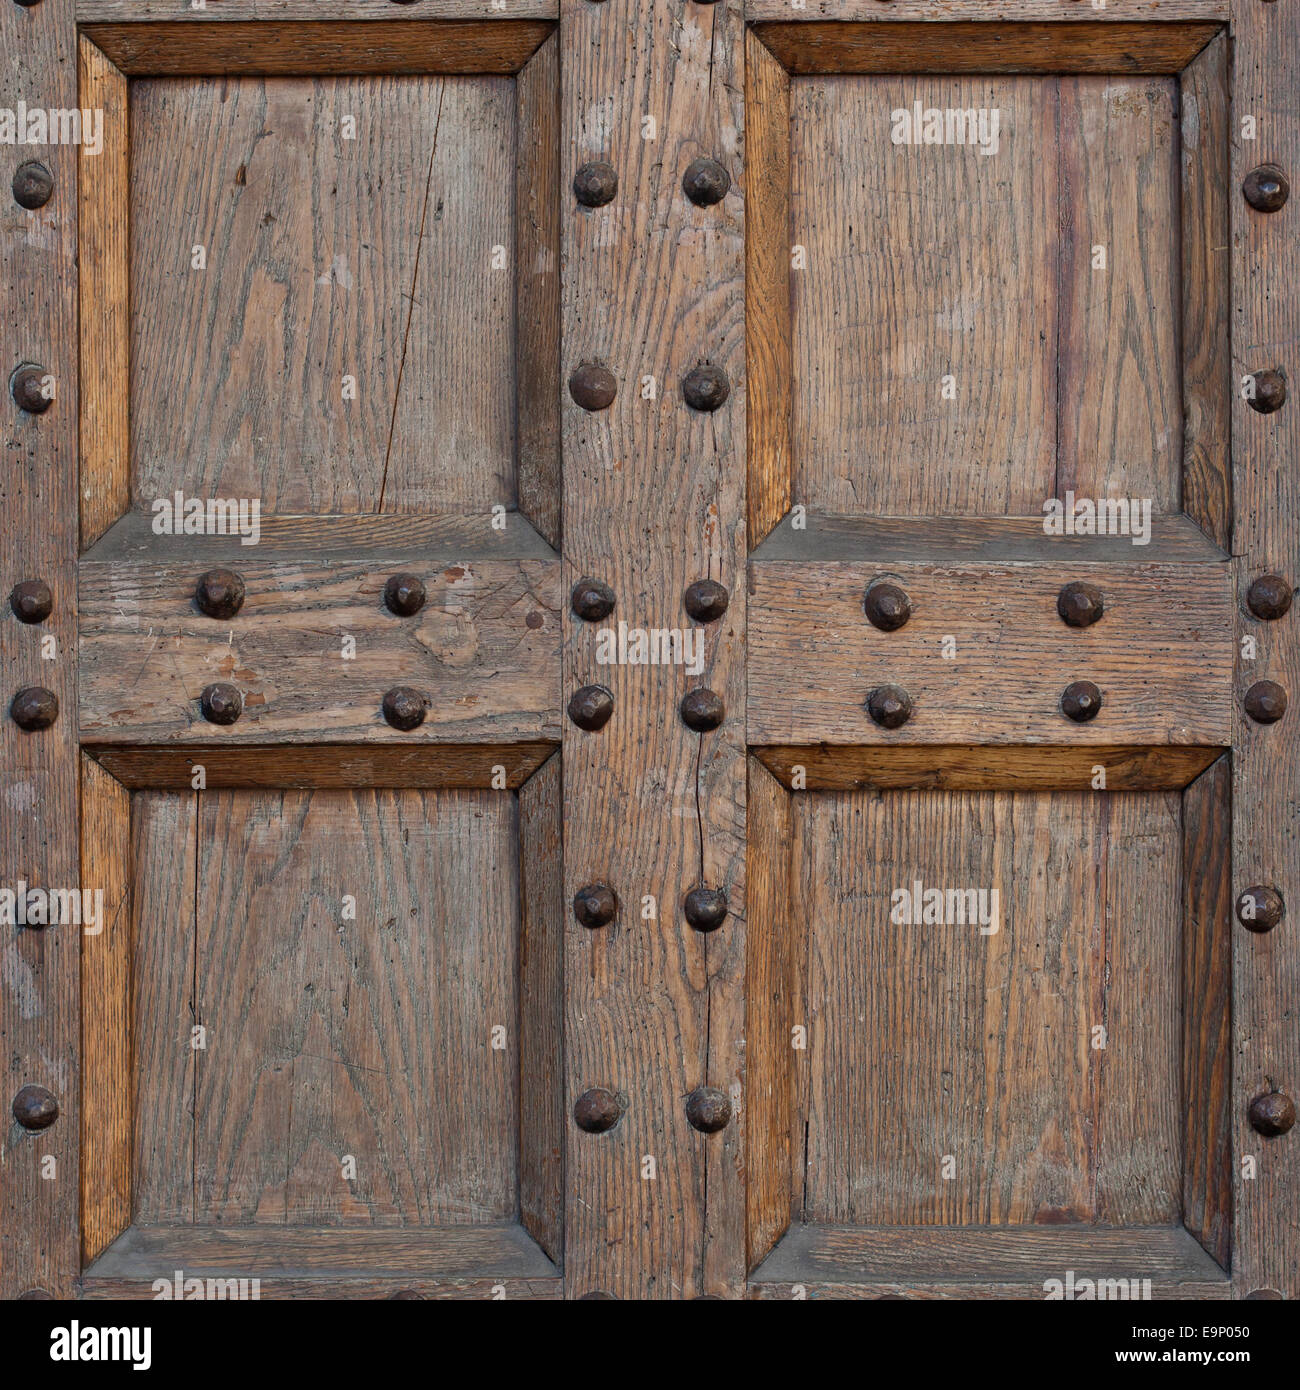 Detail of old solid door. Wood and metal door with metallic spikes looking worn and grungy. Part of ancient castle or fortress. Stock Photo